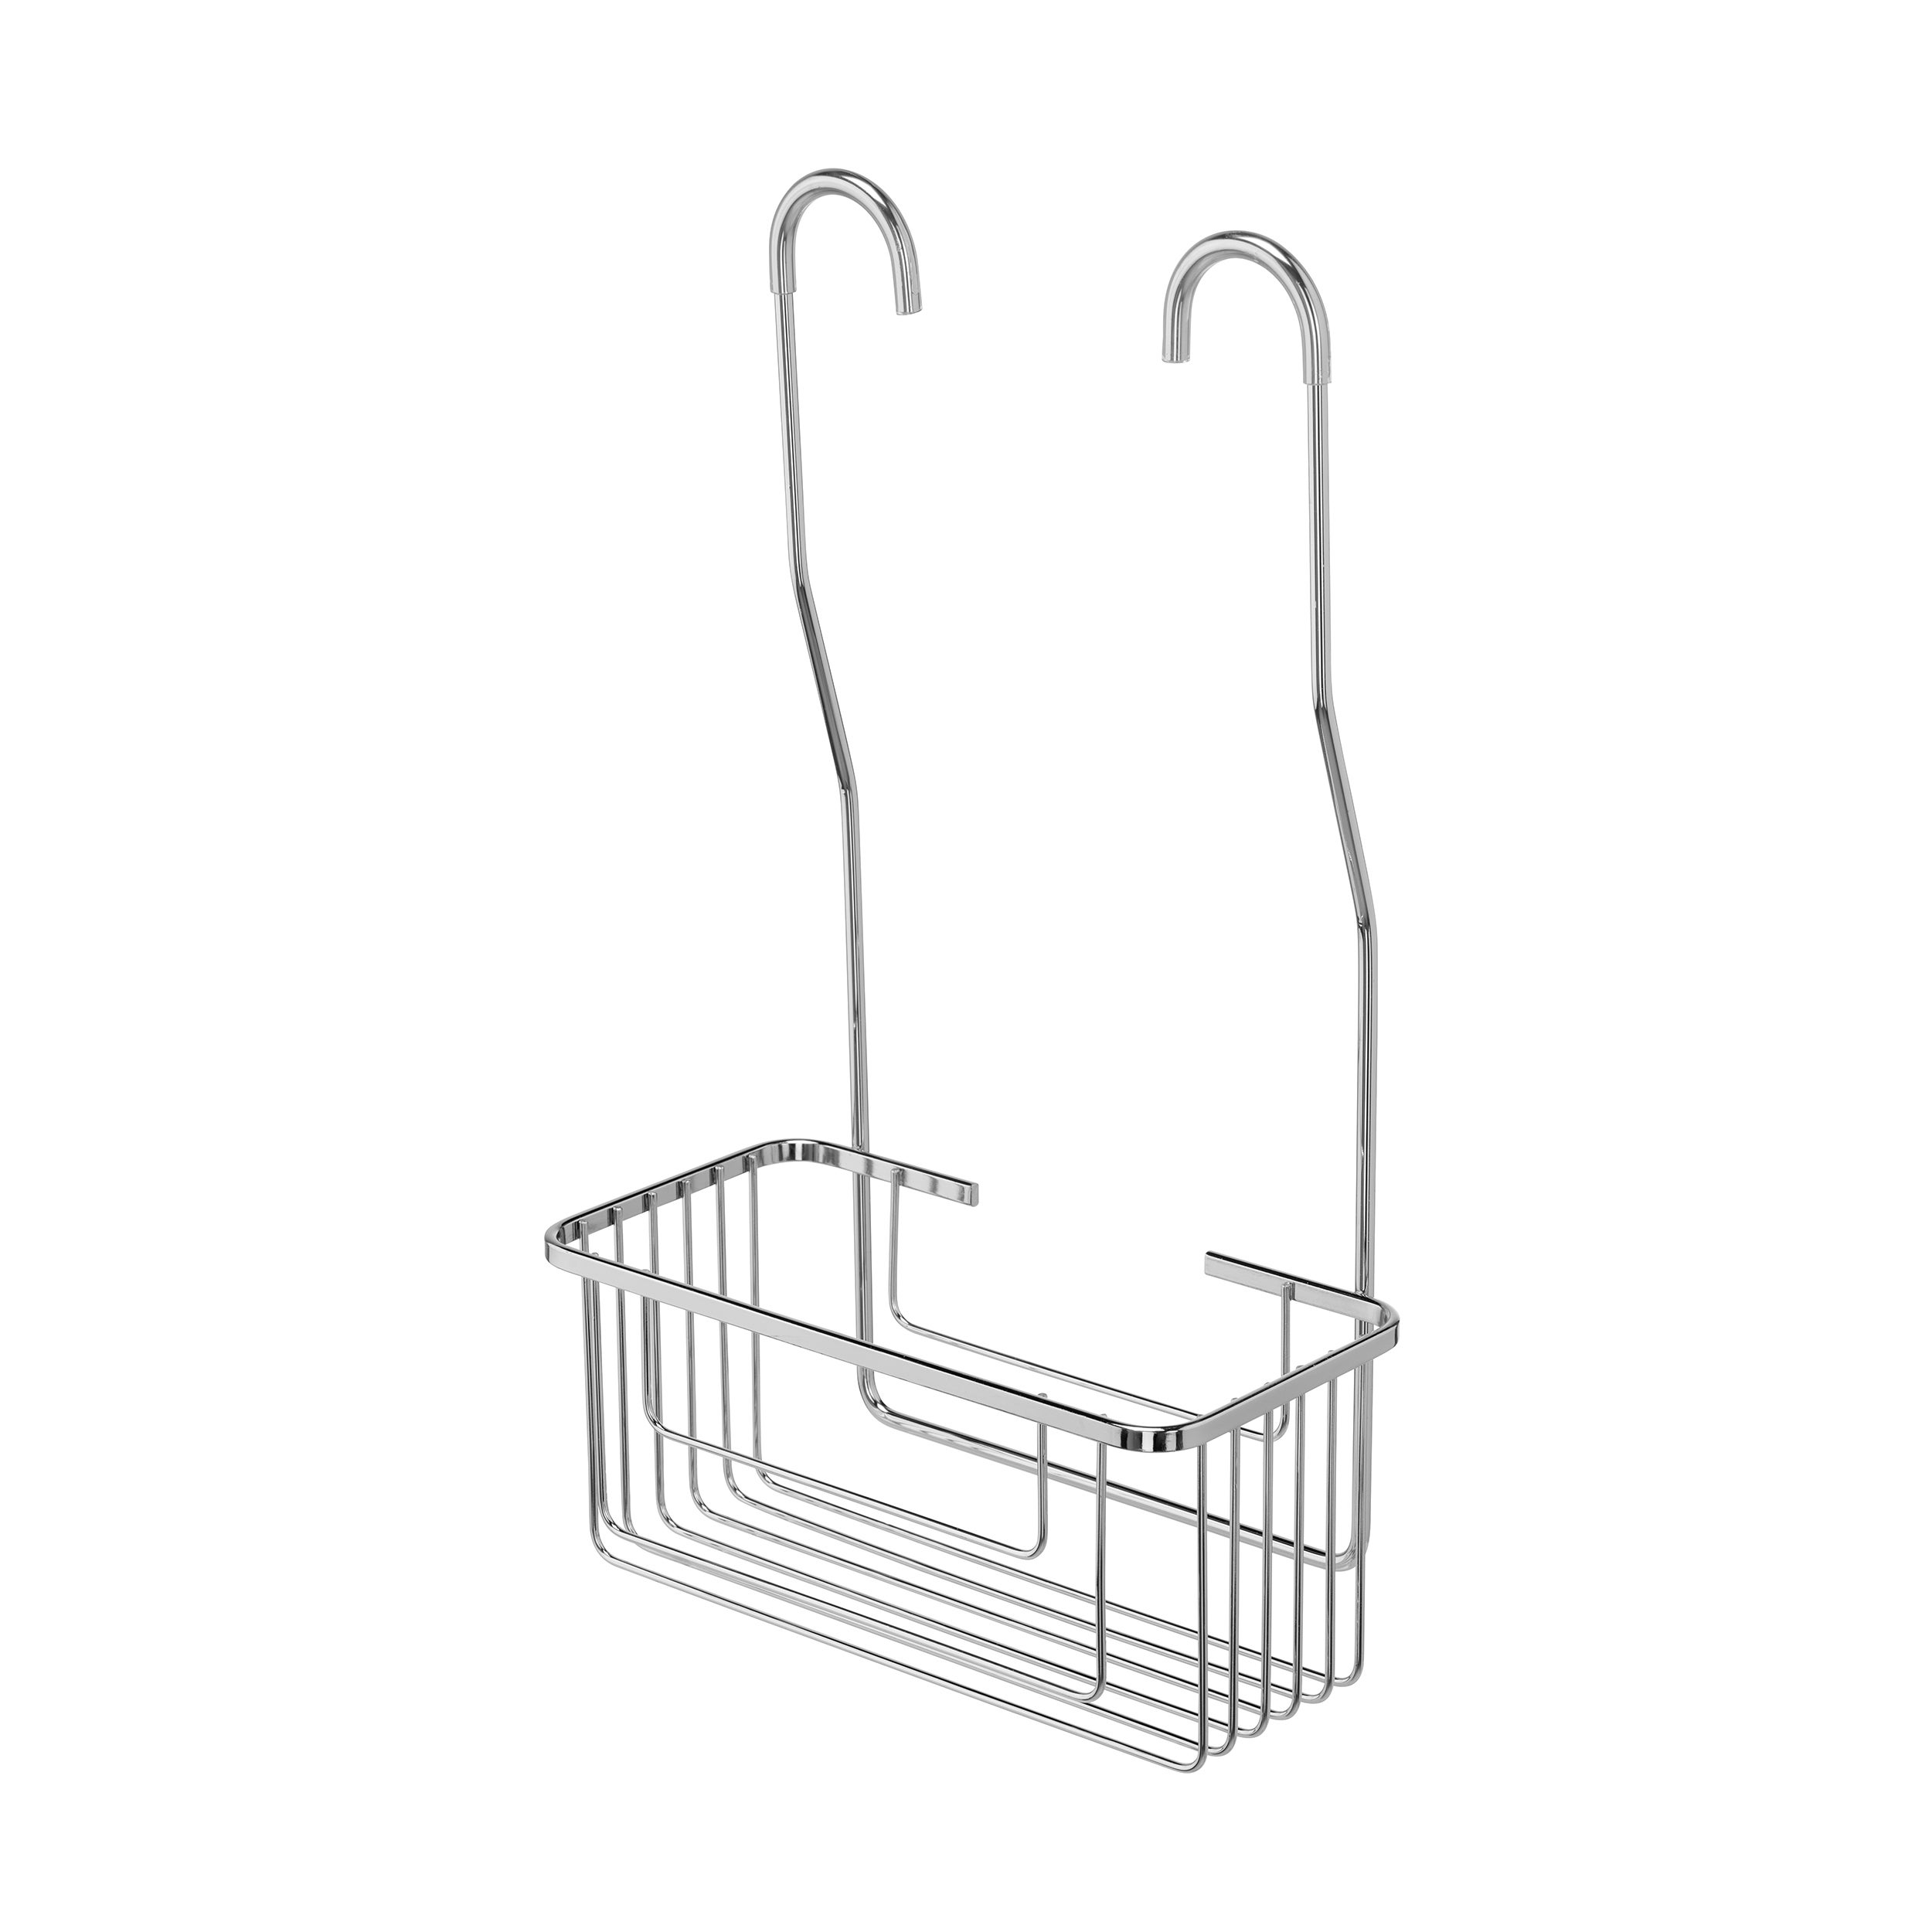 The Rust-Free Plastic Shower Caddy - Everything Simple